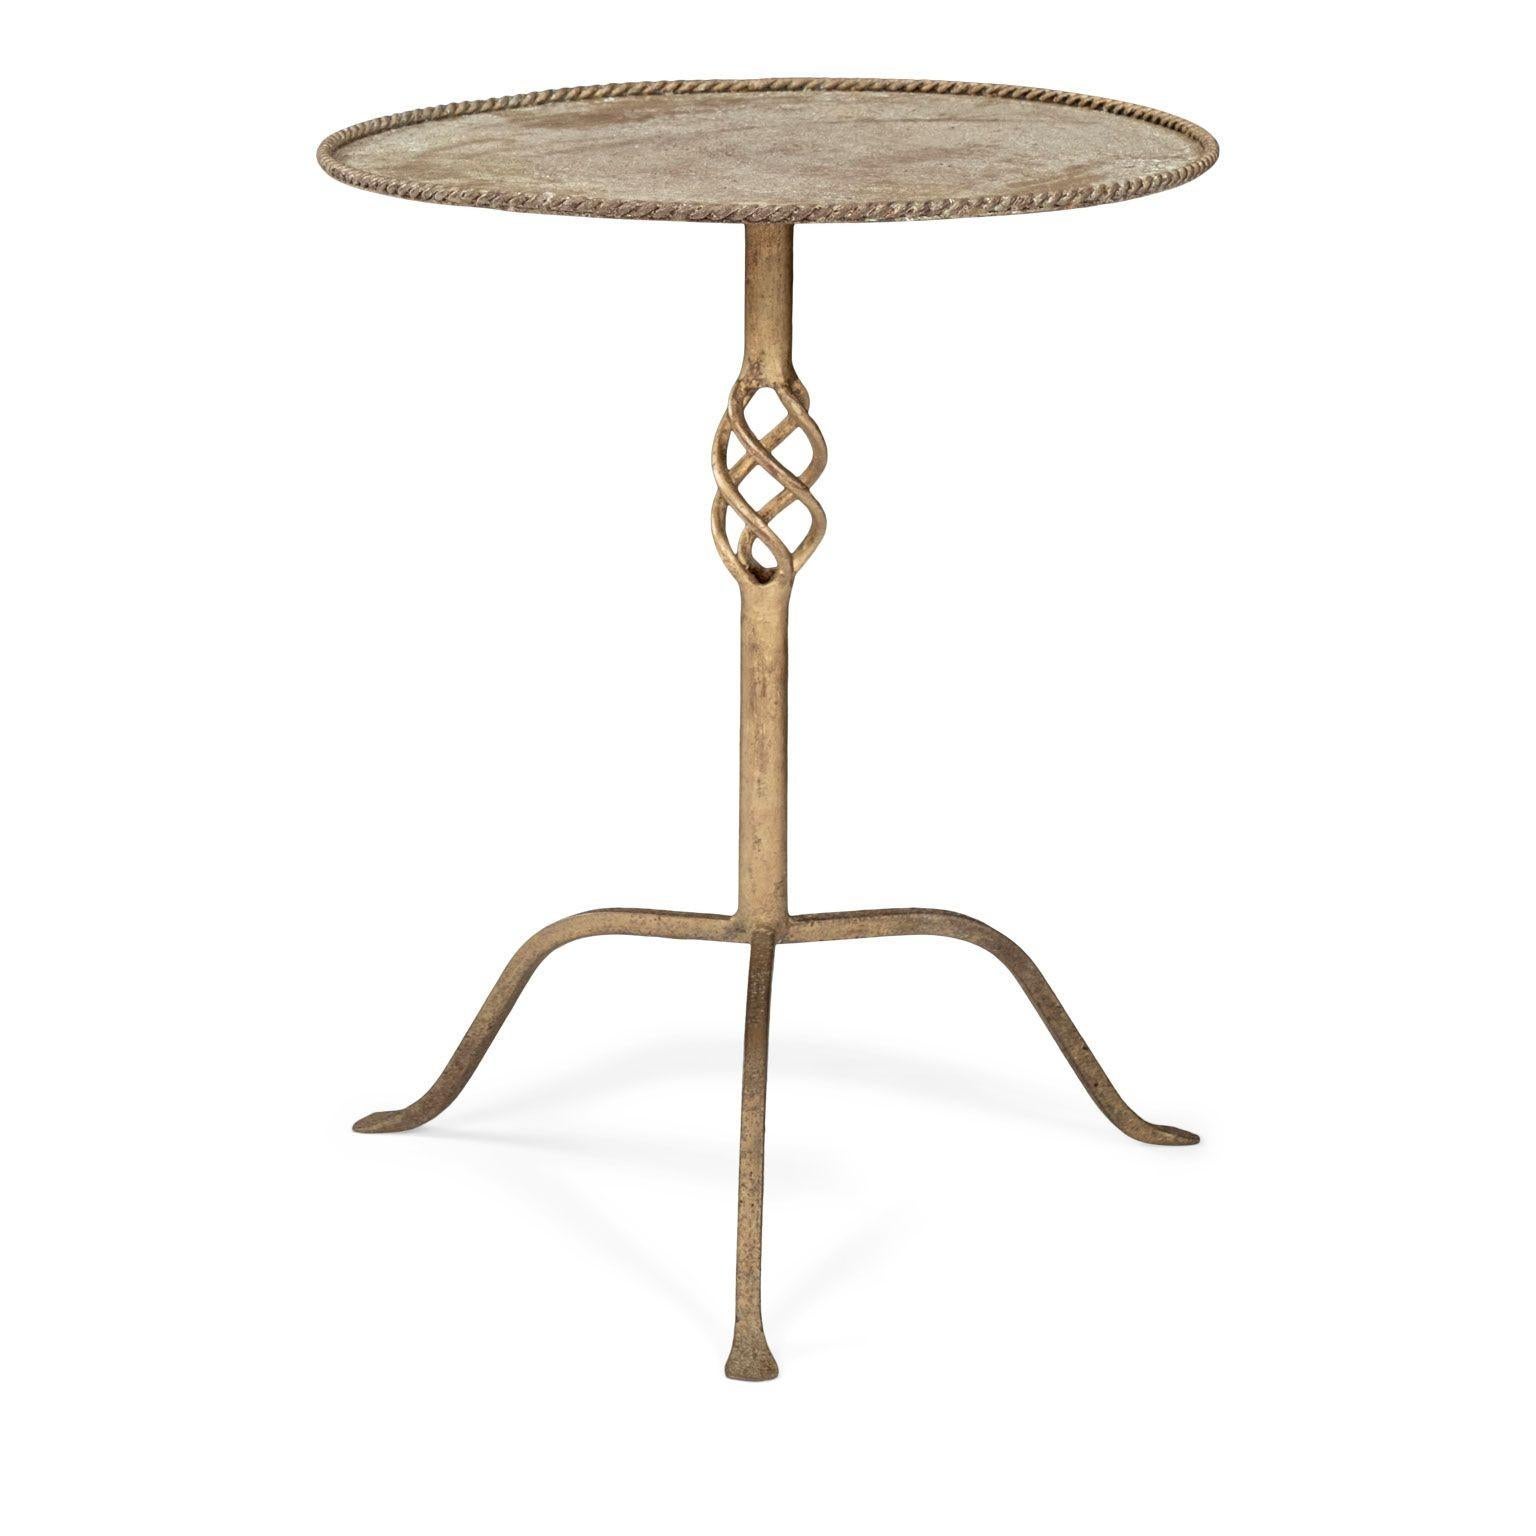 Gilt-iron martini table circa 1950-1969, Spain. Low twisted-iron gallery, spiraled decoration and tripod base. Original gilded finish accentuated by milding scaling and patina from age.

Note: Original/early finish on antique and vintage metal will